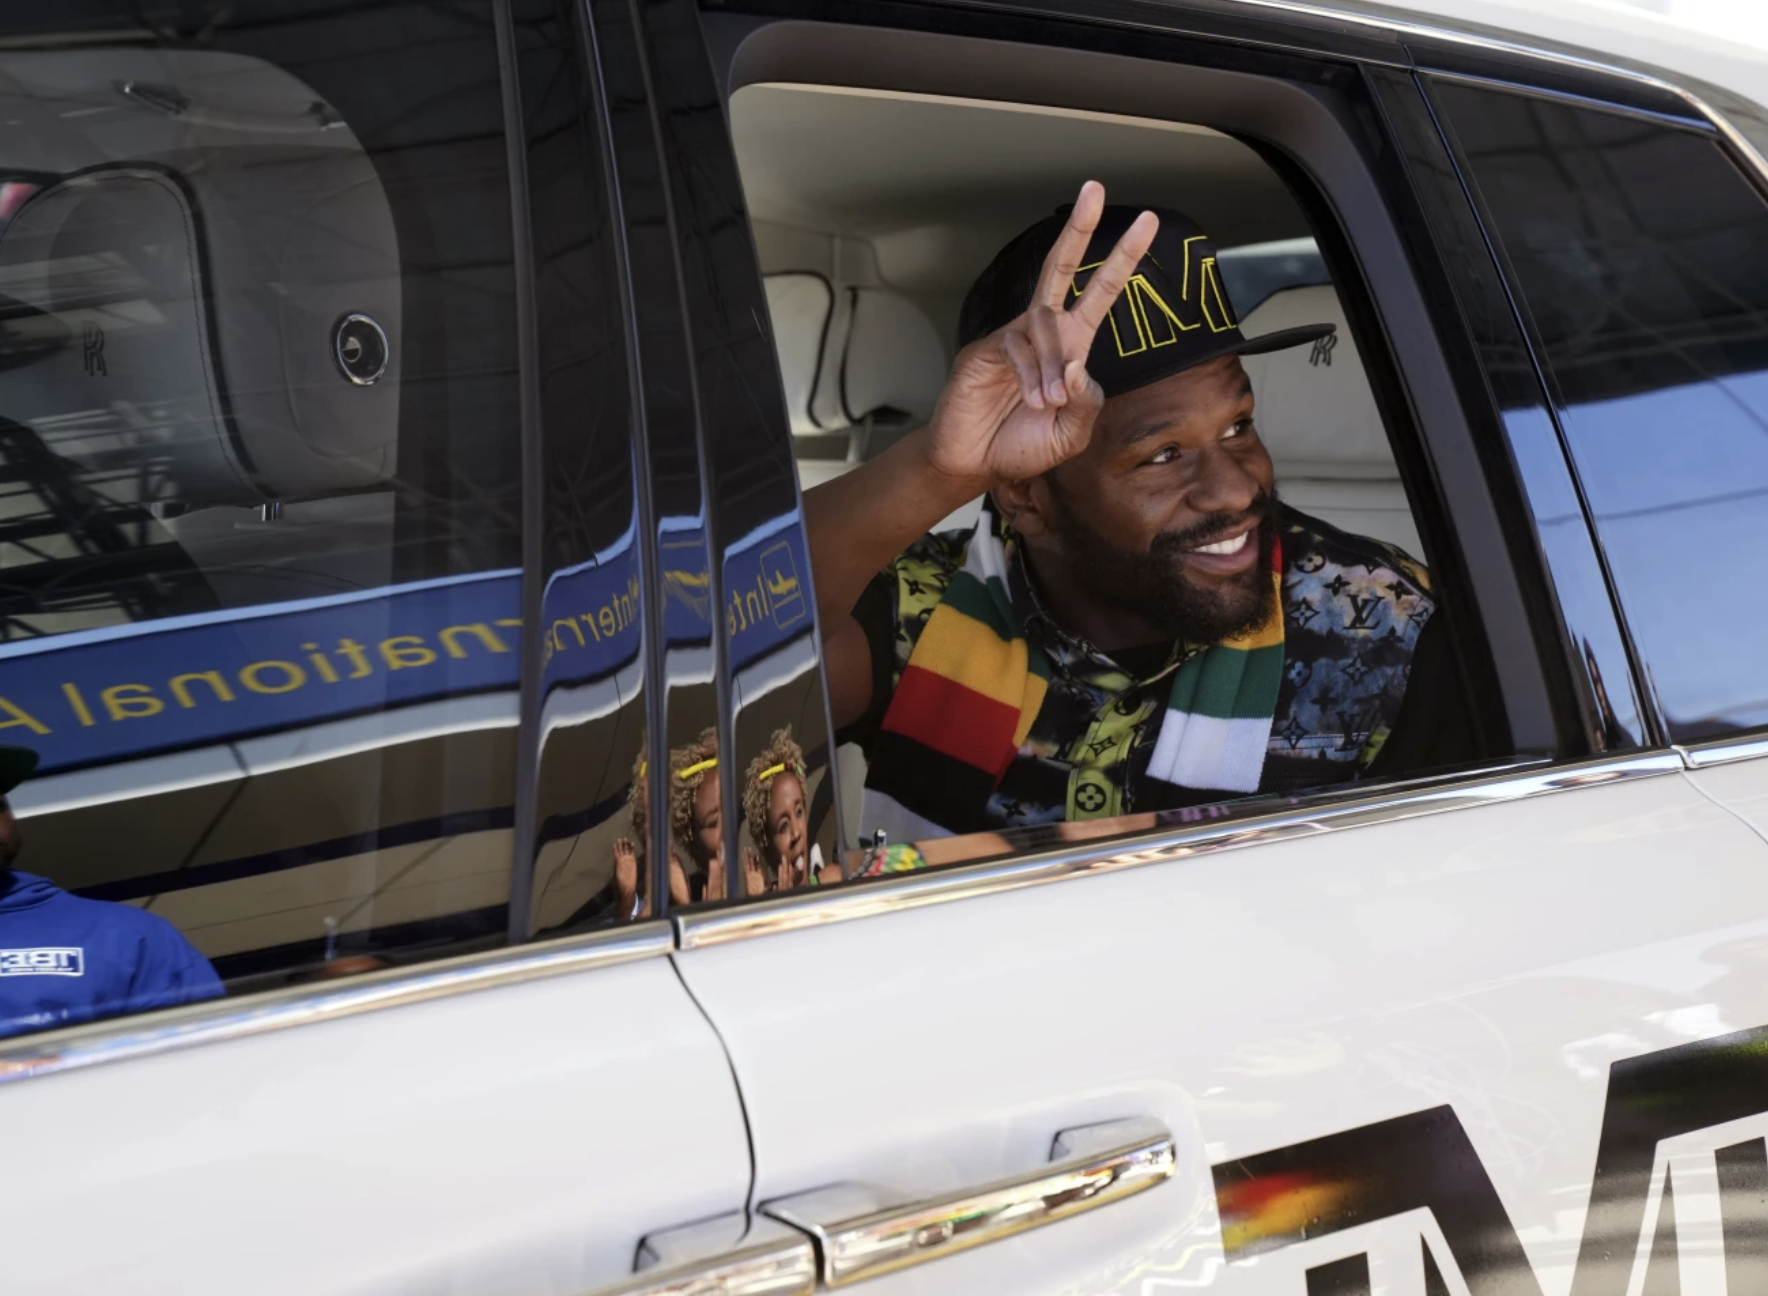 Floyd Mayweather walked out of the gucci store in South Africa